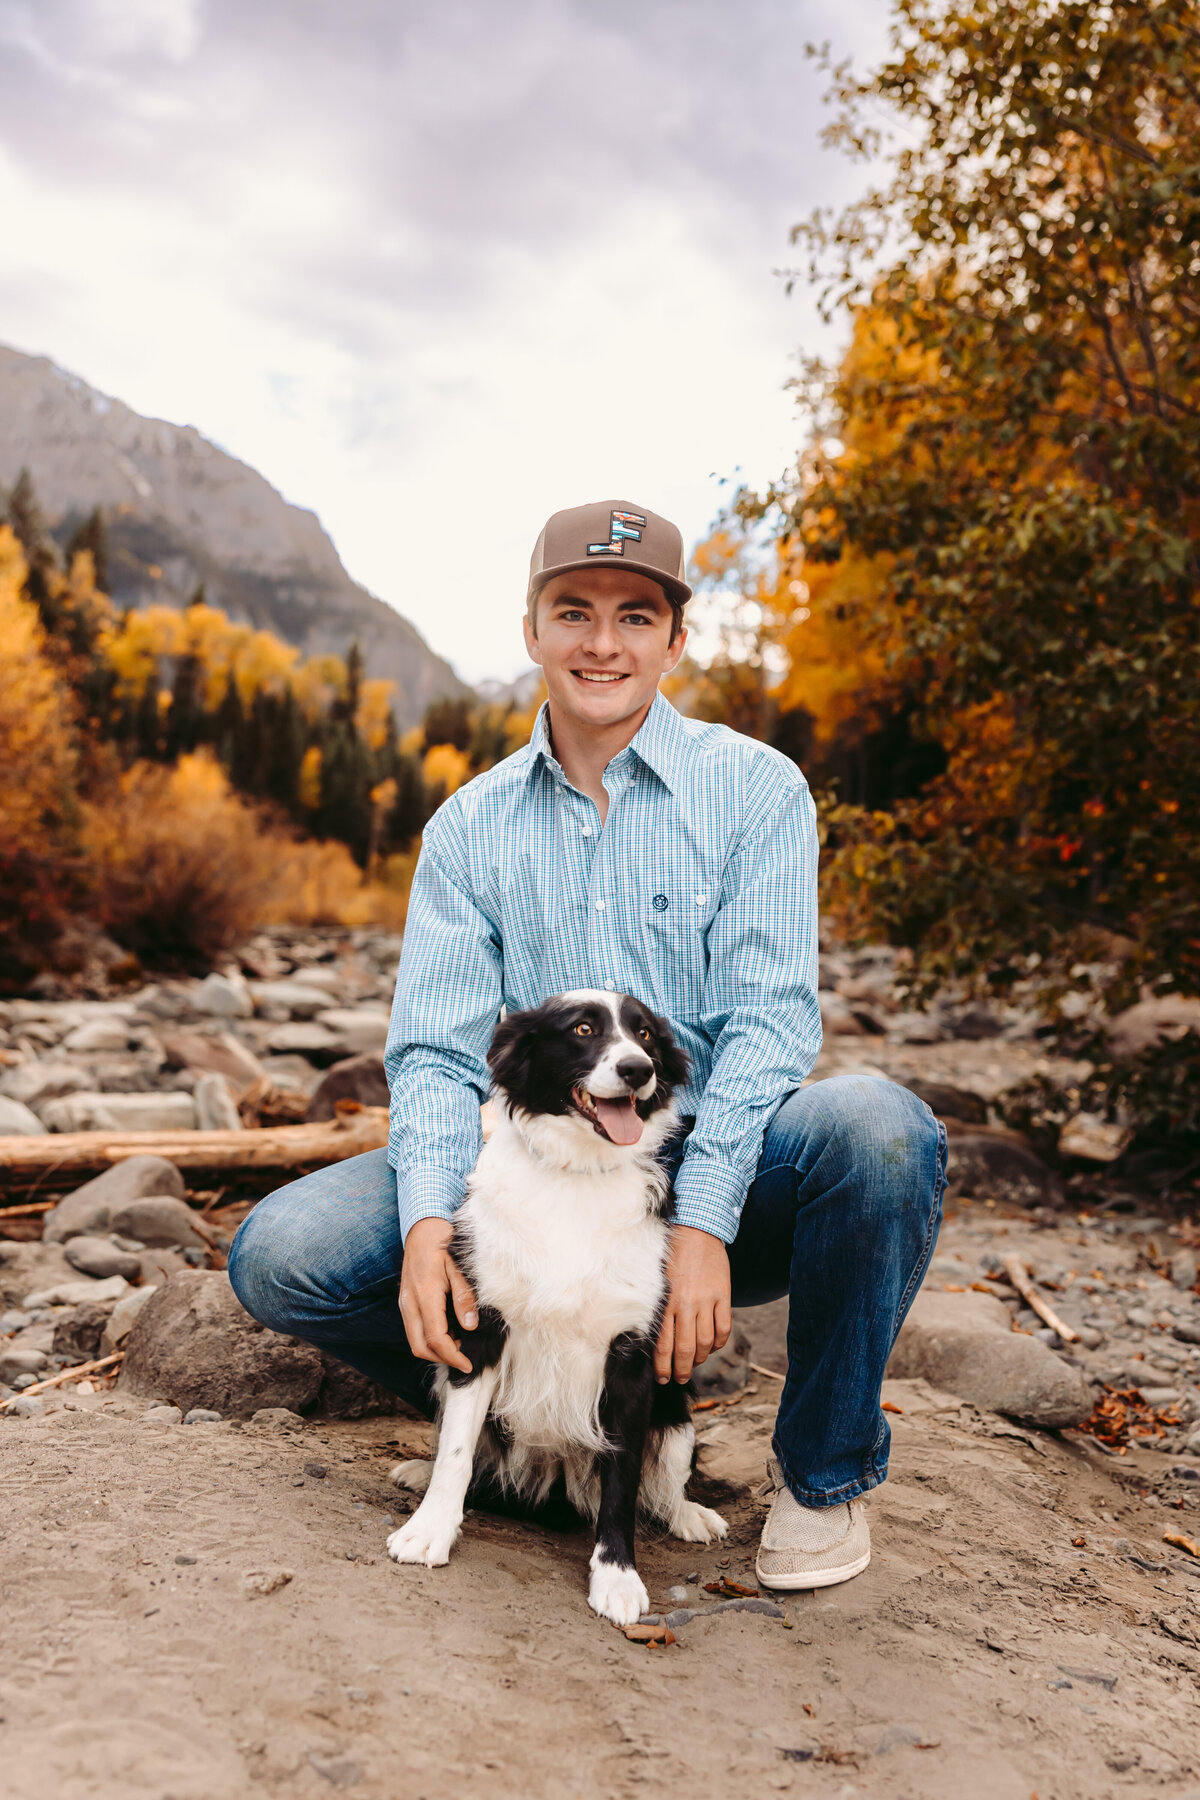 Josh poses with his dog for his Montrose senior pictures.